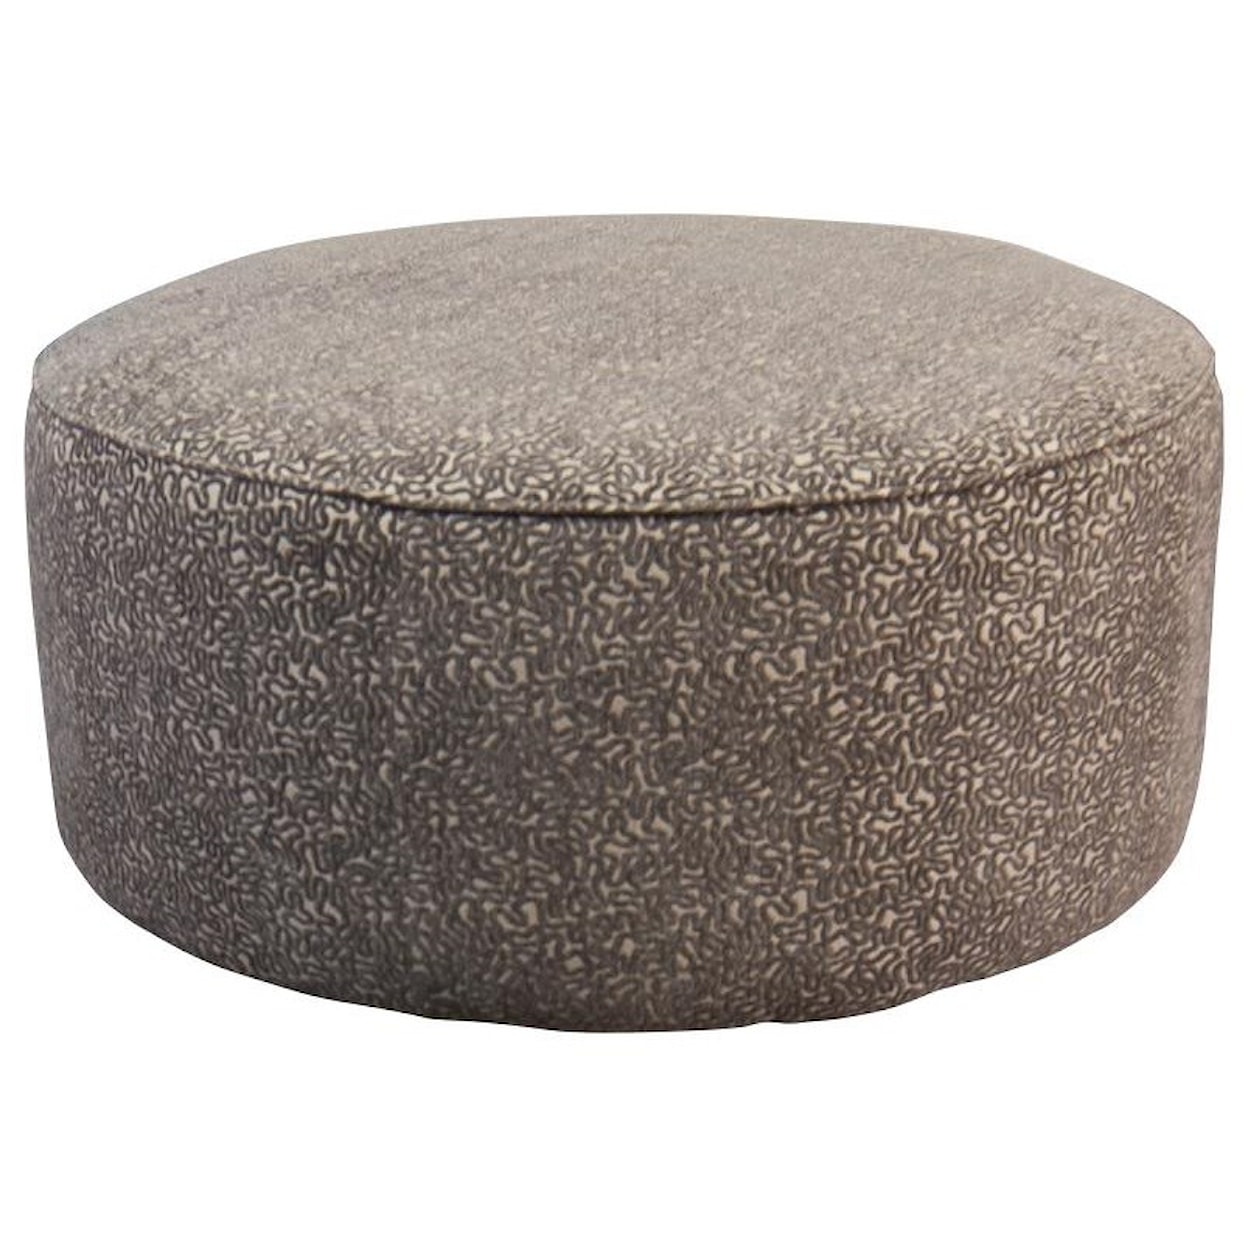 Fusion Furniture Kerry Kerry Cocktail Ottoman